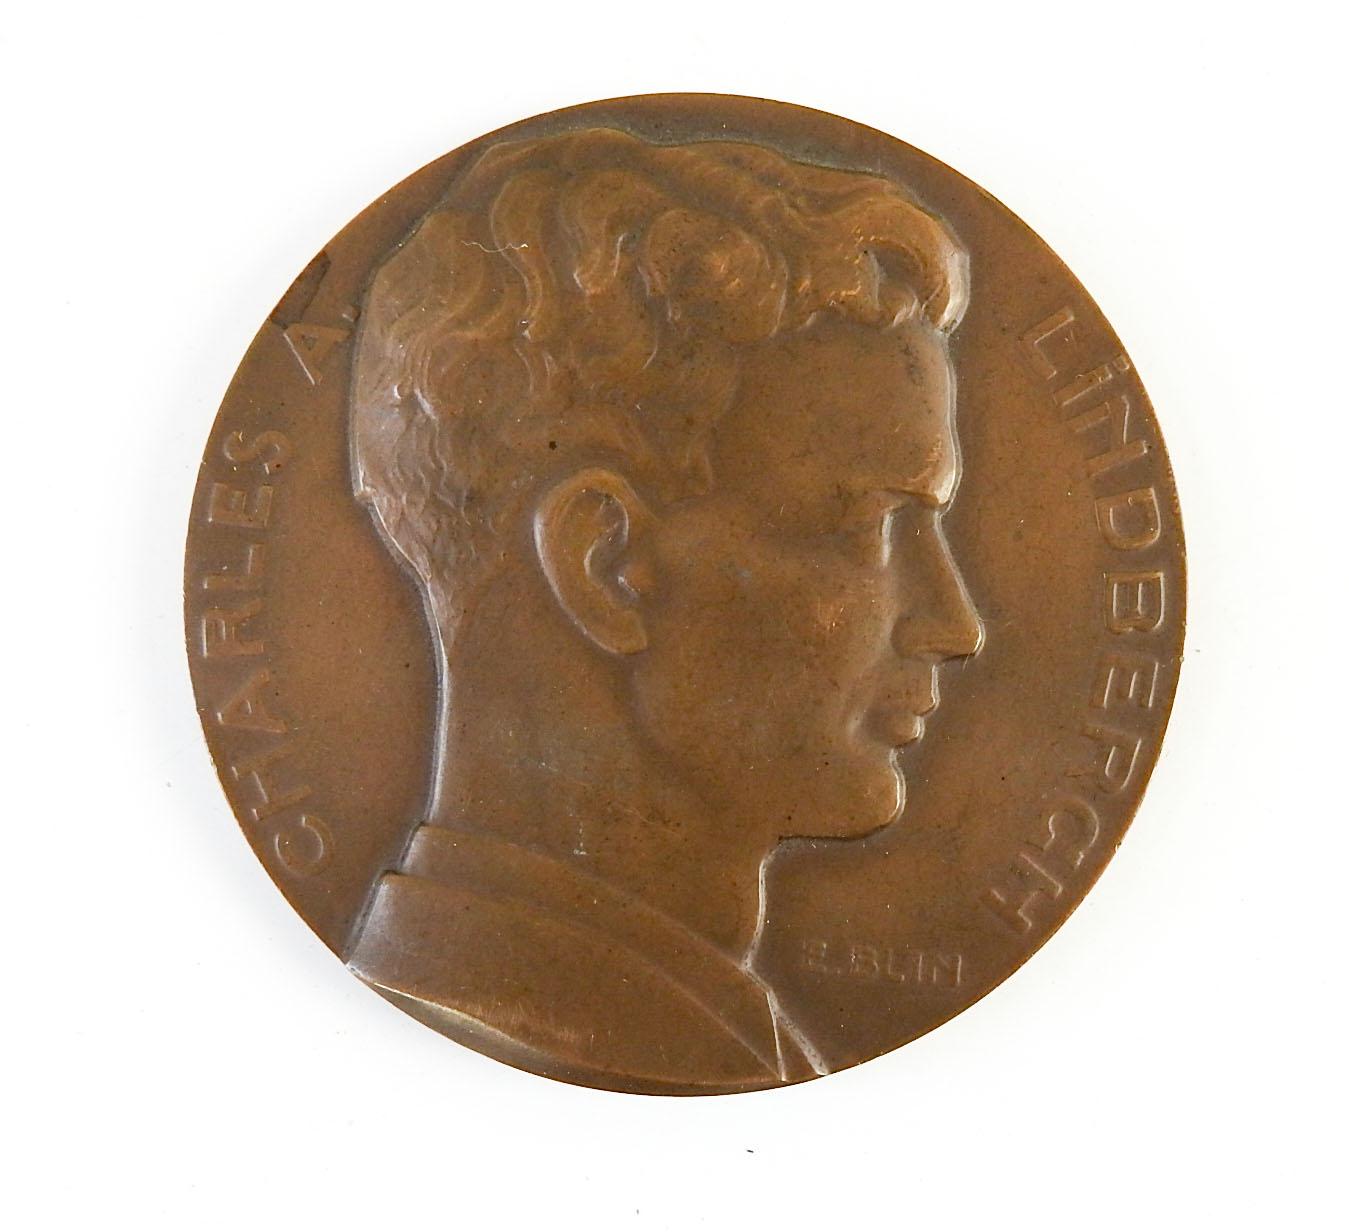 Circa 1927 bronze medallion commemorating Charles Lindbergh and Spirit of St. Louis, sculptor Edouard-Pierre Blin.  Signed E. Blin, produced by Henri Teterger,  the obverse with Lindbergh's profile while the reverse commemorates the aviator's